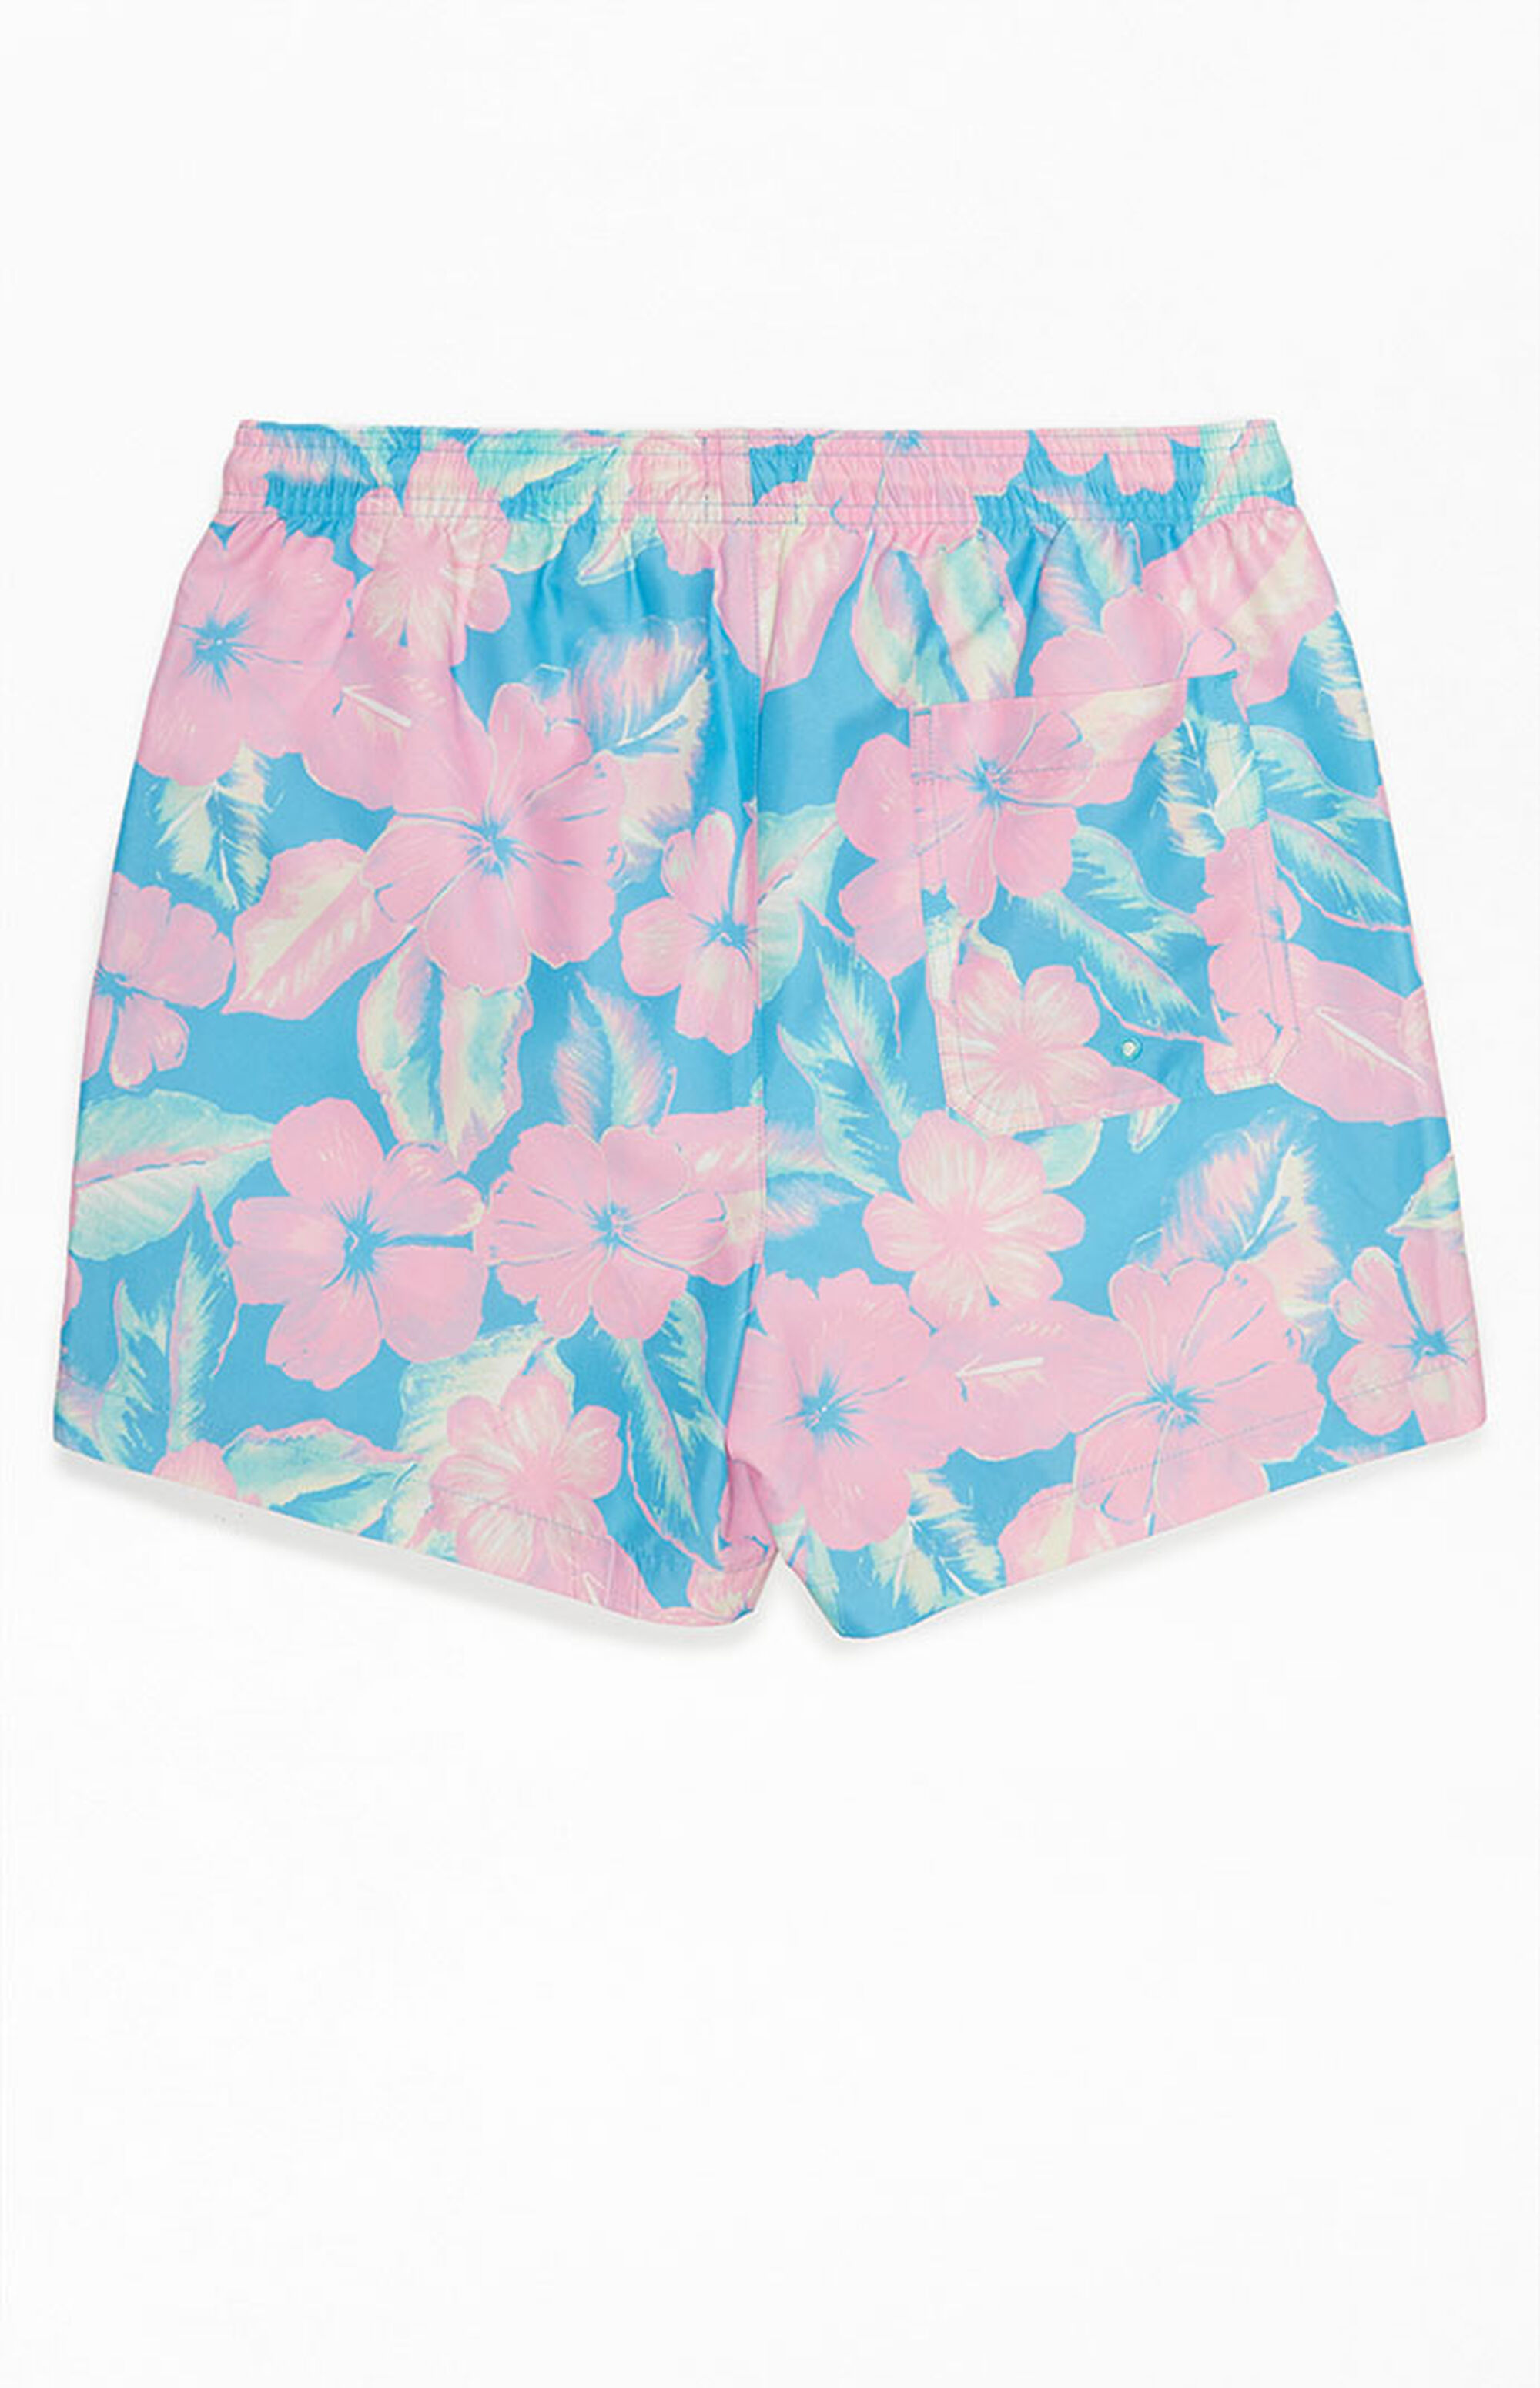 PacSun Recycled Hibiscus 15